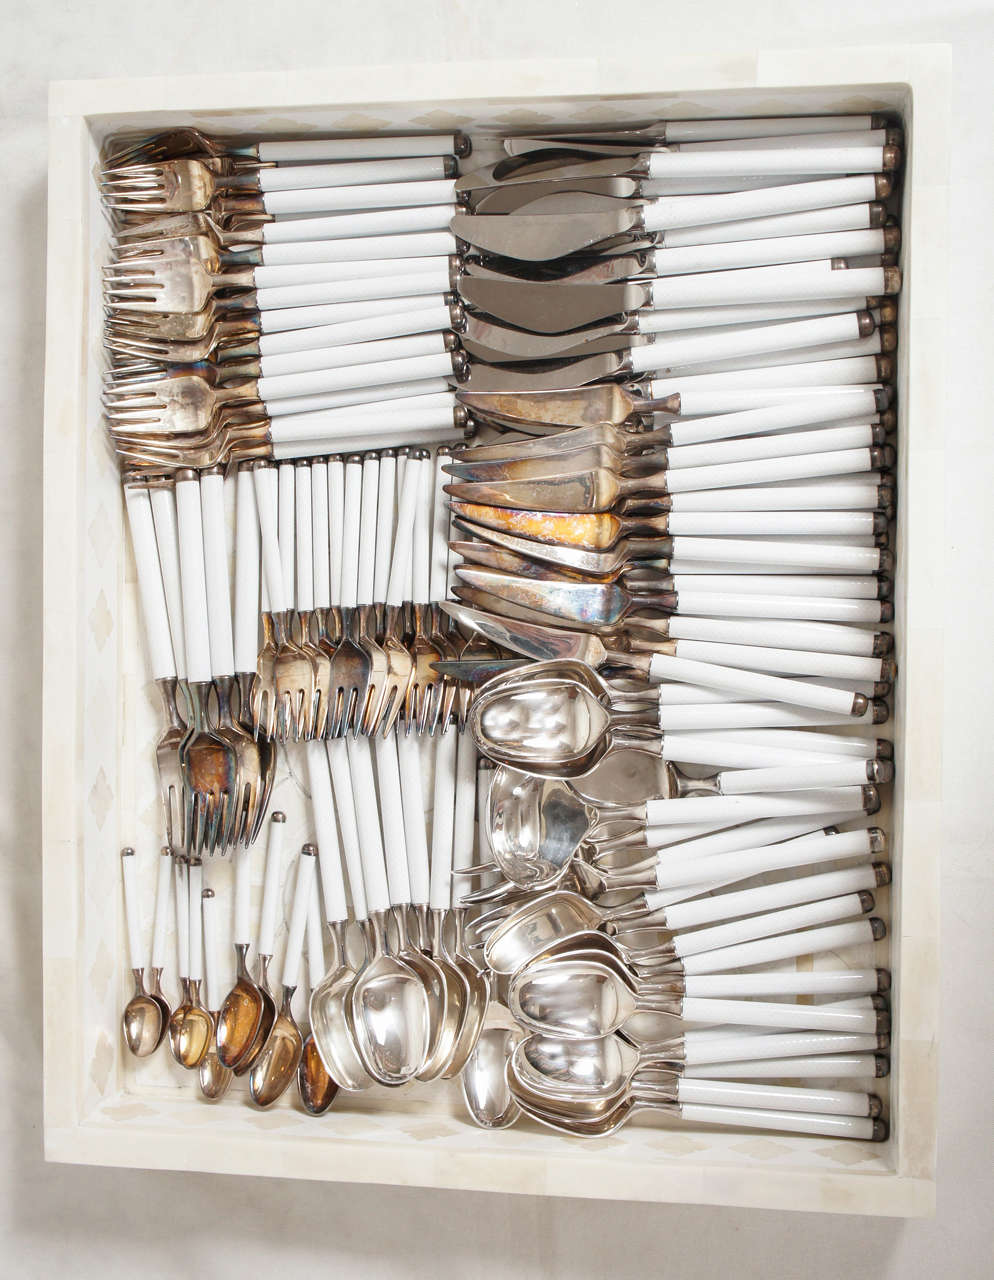 handsome, substantial, incredible!
124 piece flatware set in the 